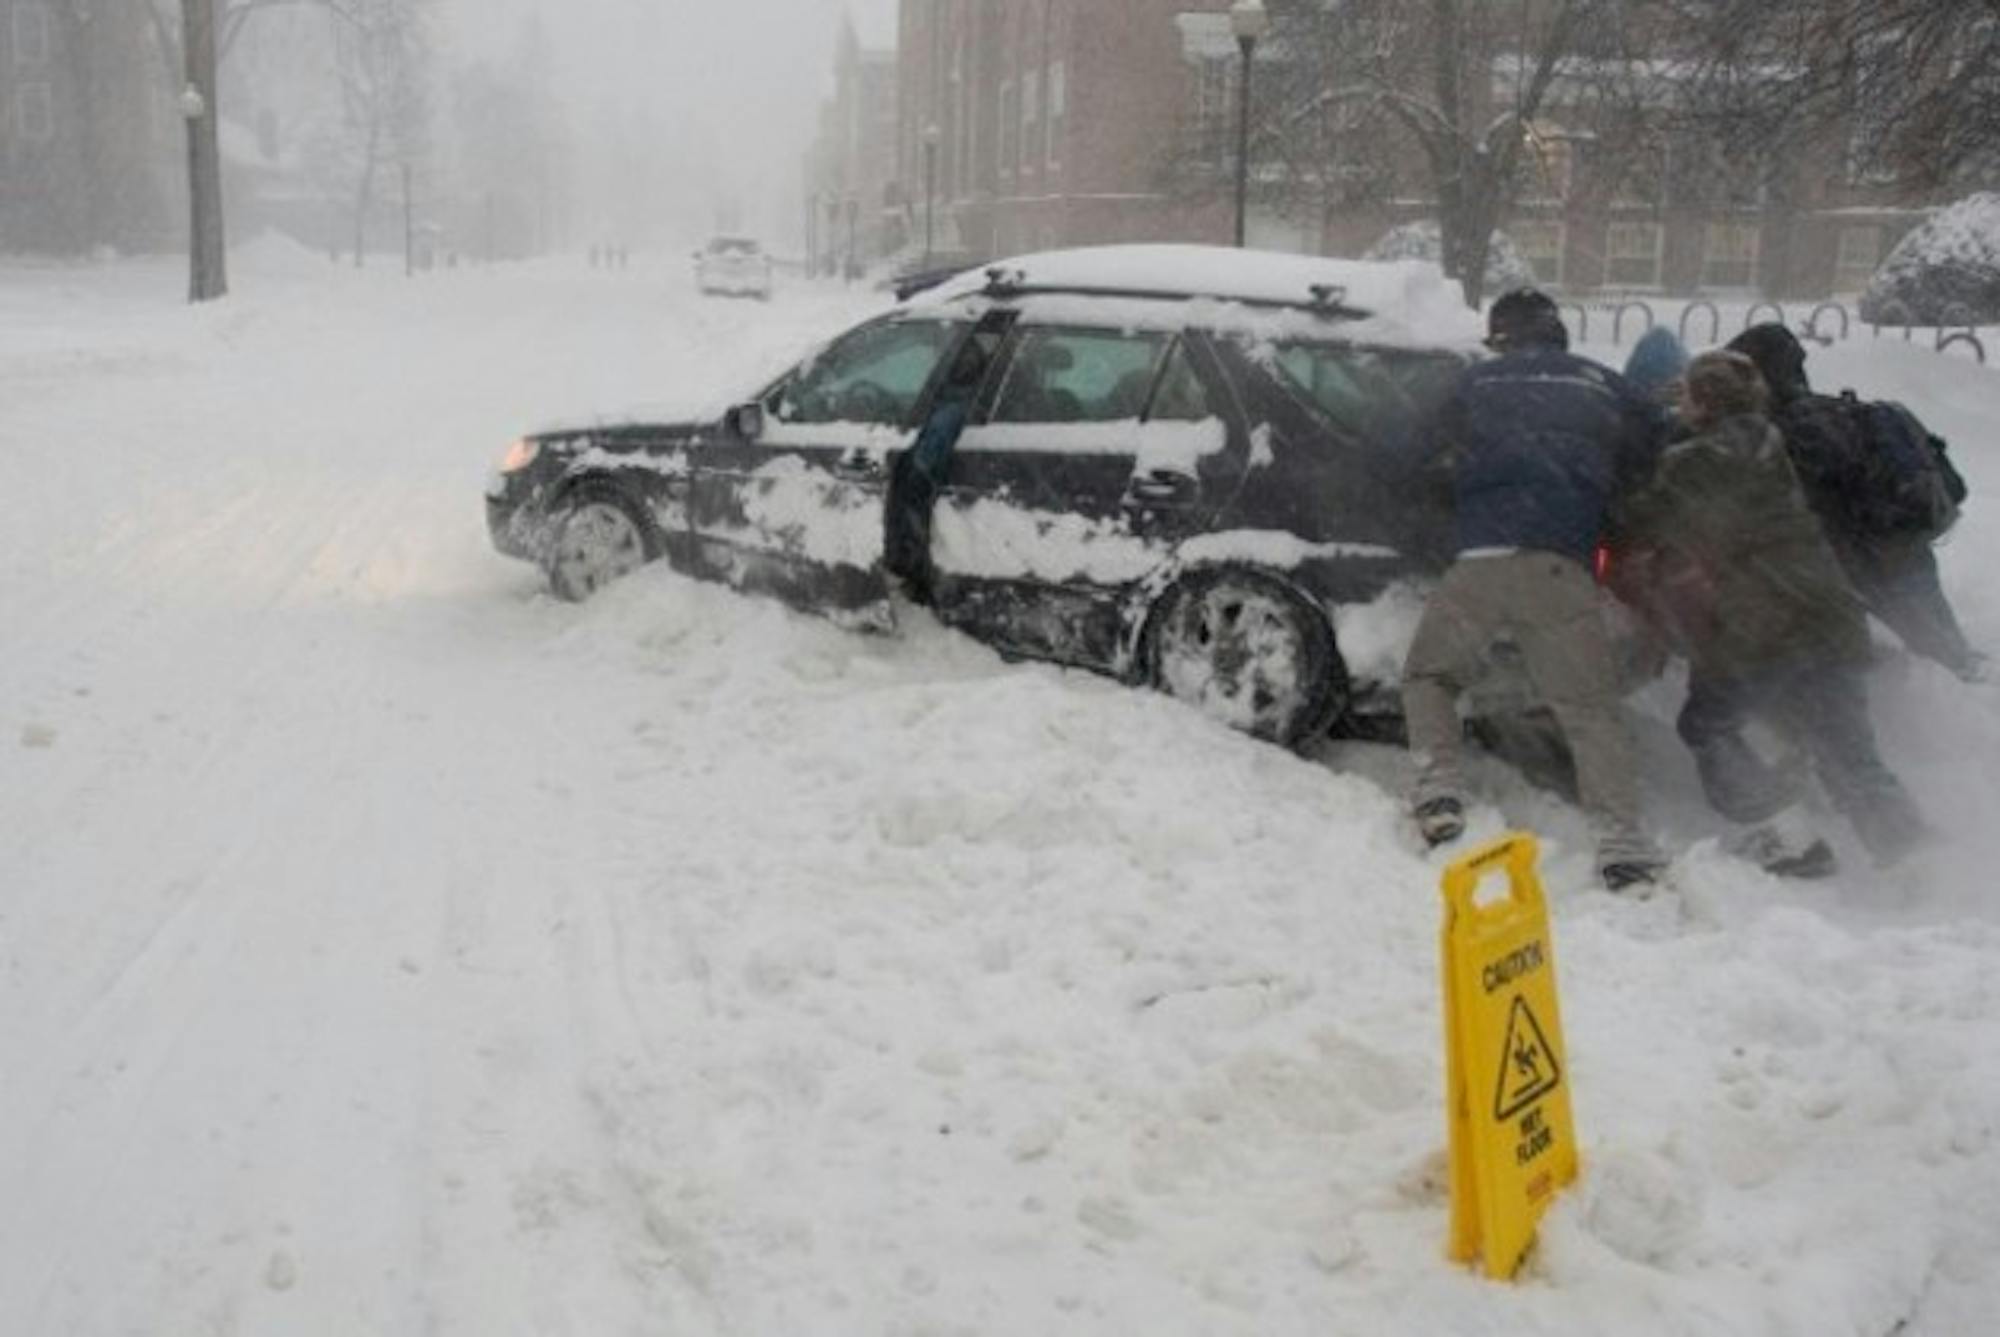 A few undergraduates help a MALS student extract her car from the snowbank. It snowed over a foot Wednesday.